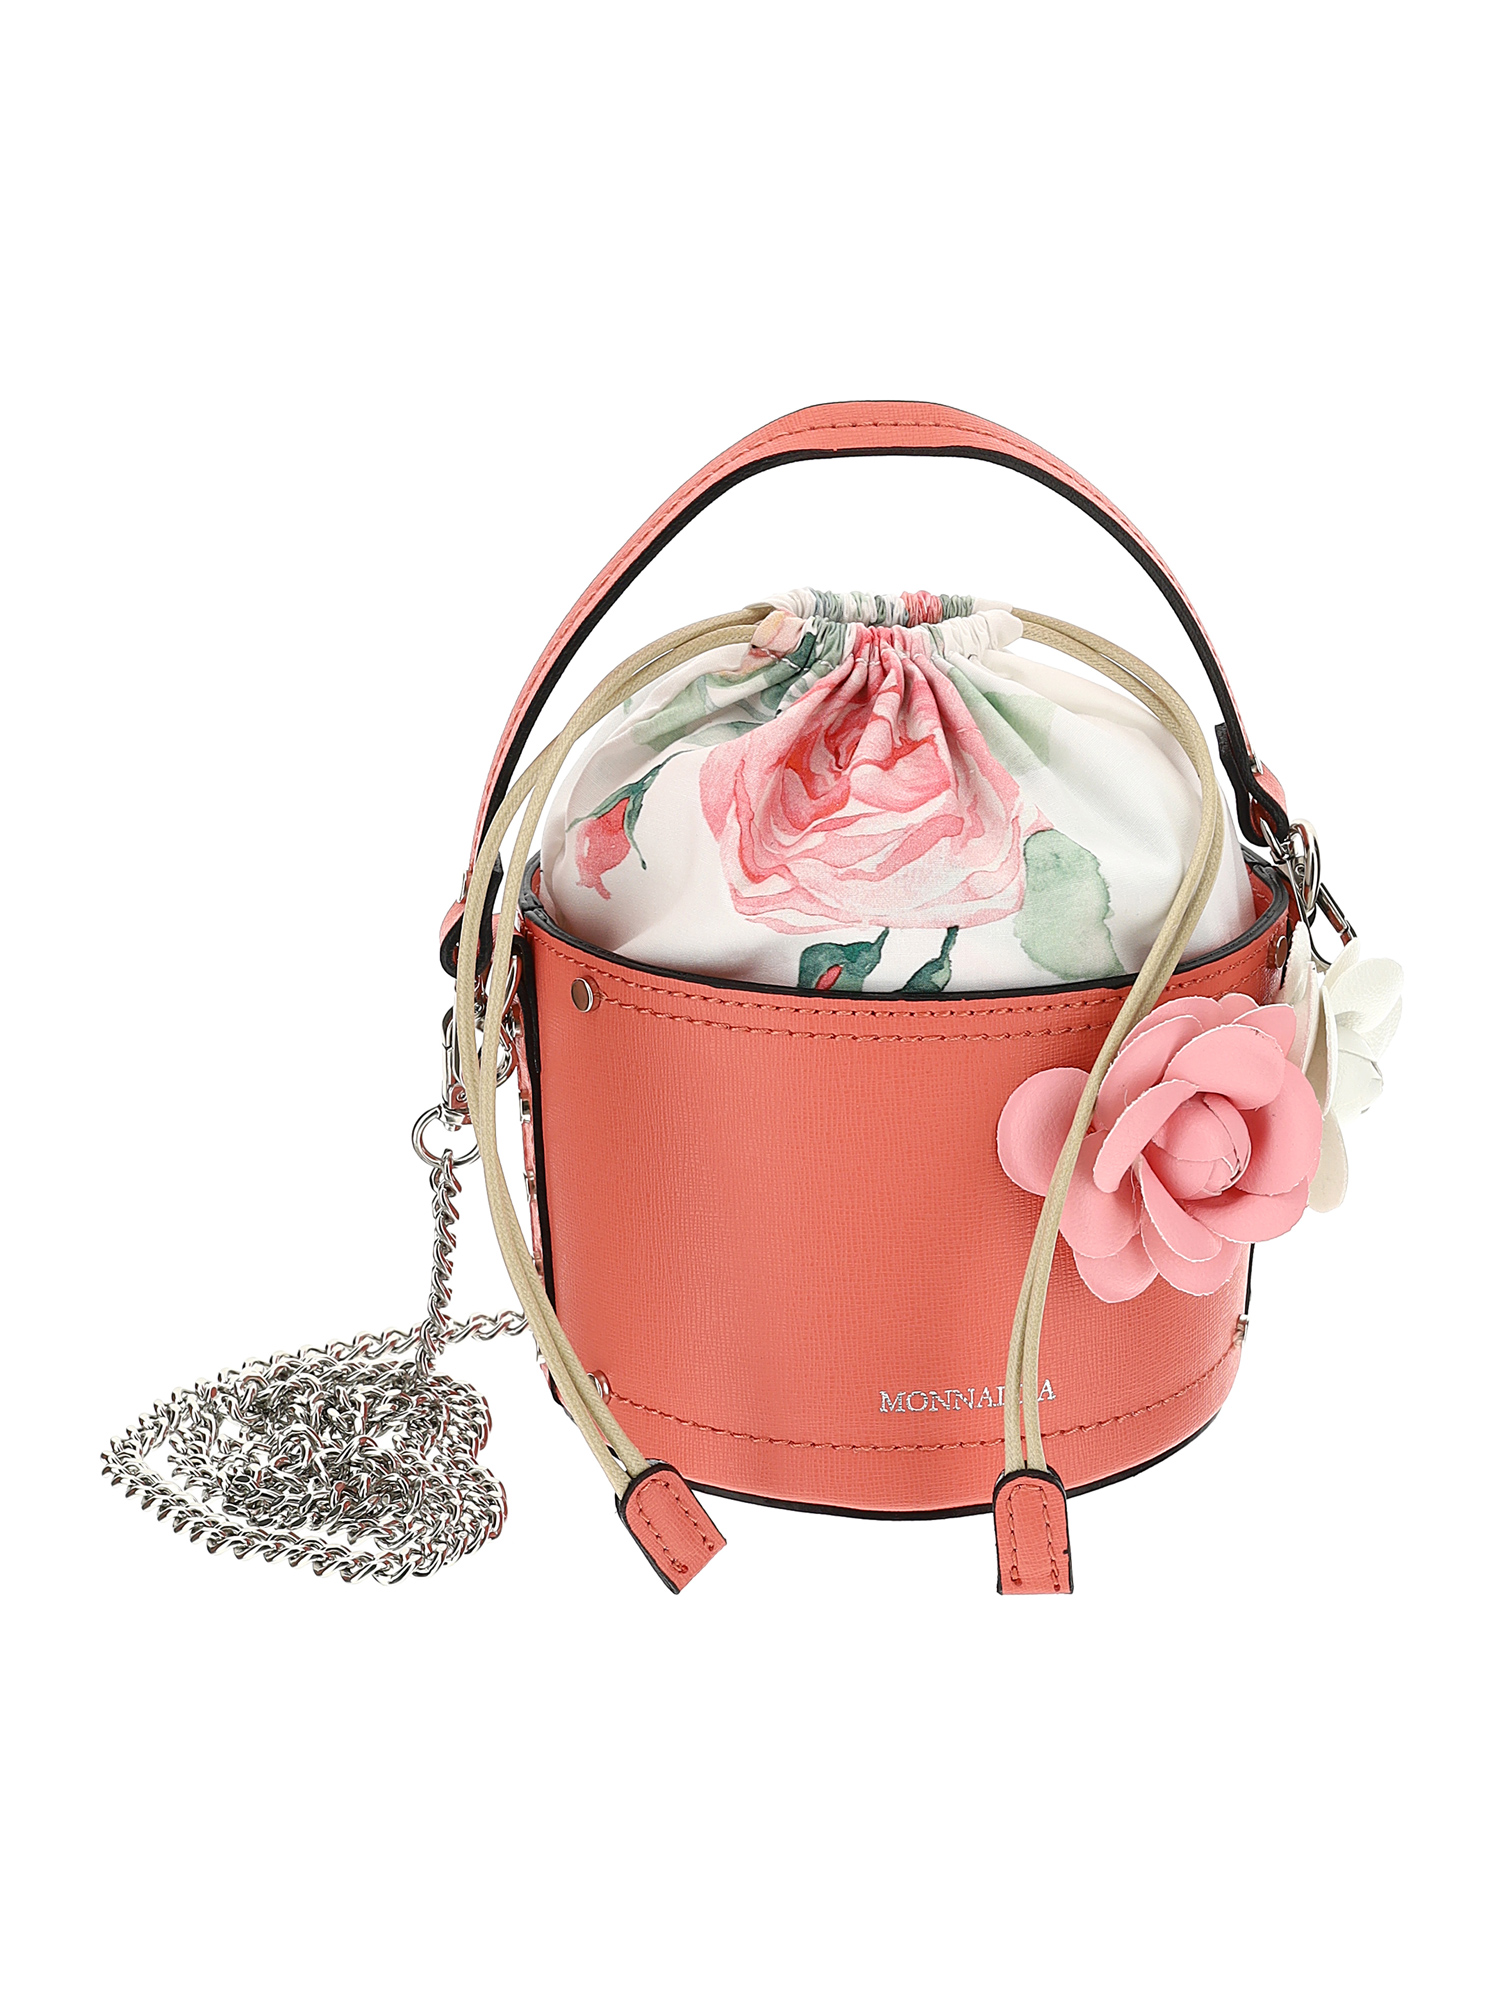 Monnalisa Floral Embroidered Leather Bucket Bag In Rosa Fairy Tale